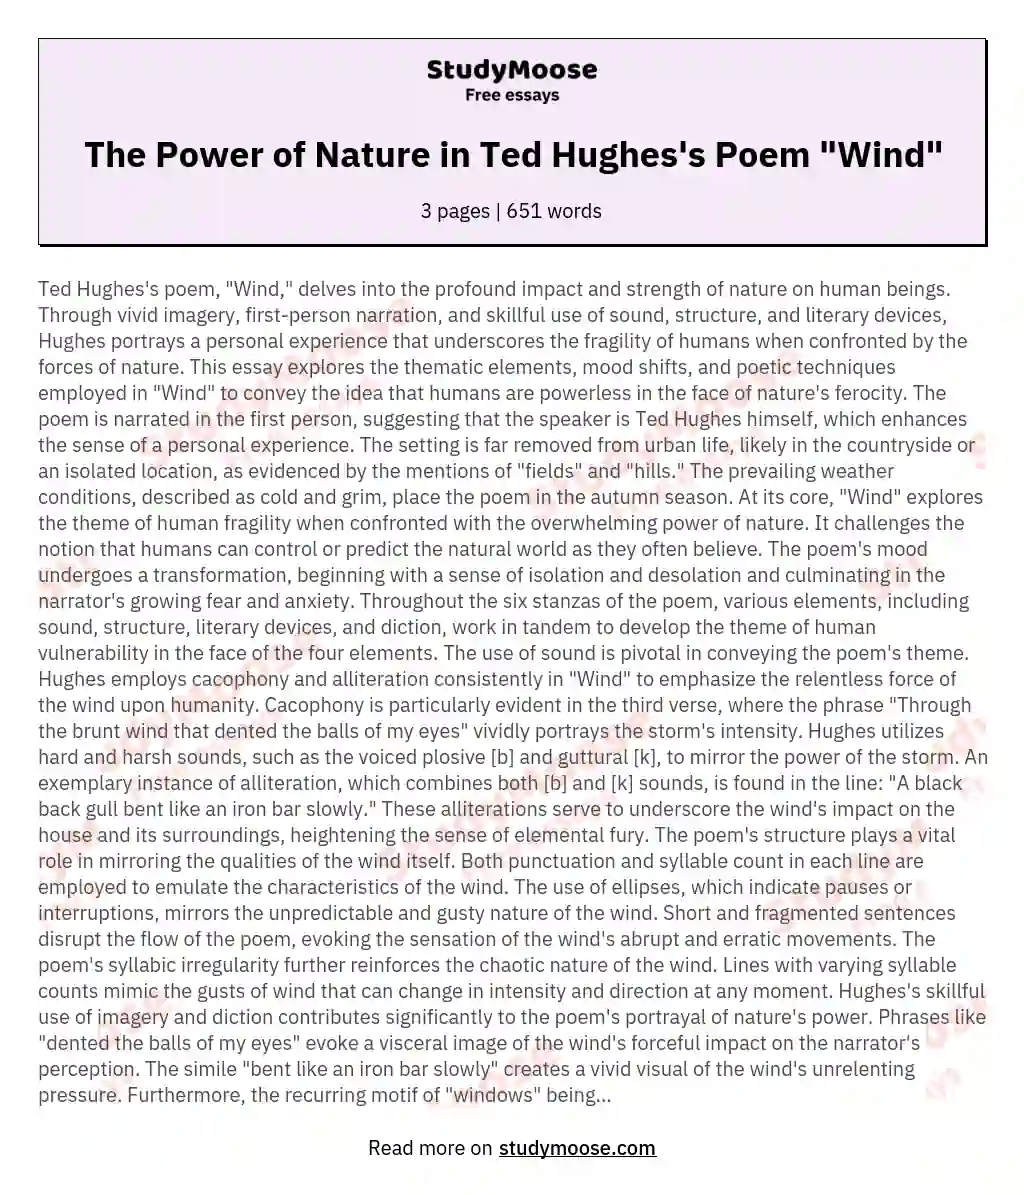 The Power of Nature in Ted Hughes's Poem "Wind" essay